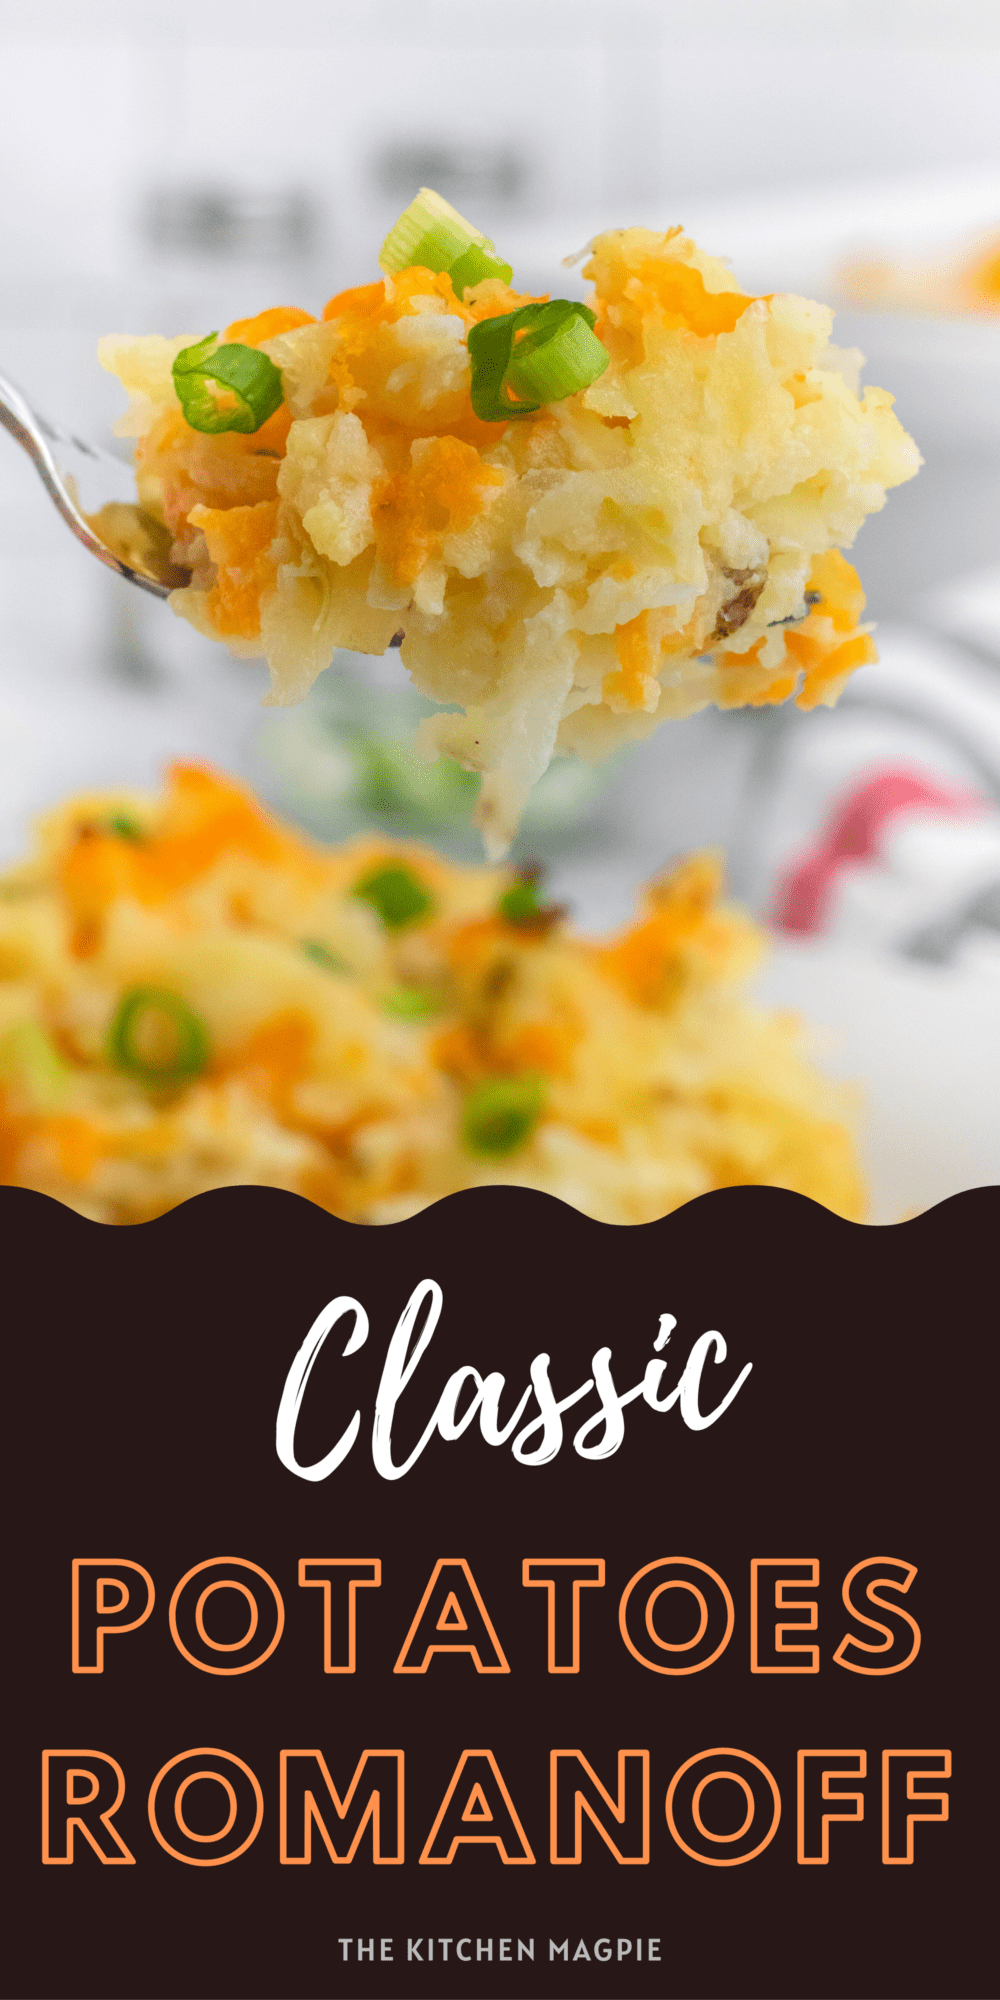 This delicious Vegas steak house classic side dish is a casserole full of delicious chunky grated baked potatoes in a sour cream, onion and cheese sauce! Best made when potatoes are baked and cooled in the fridge overnight.